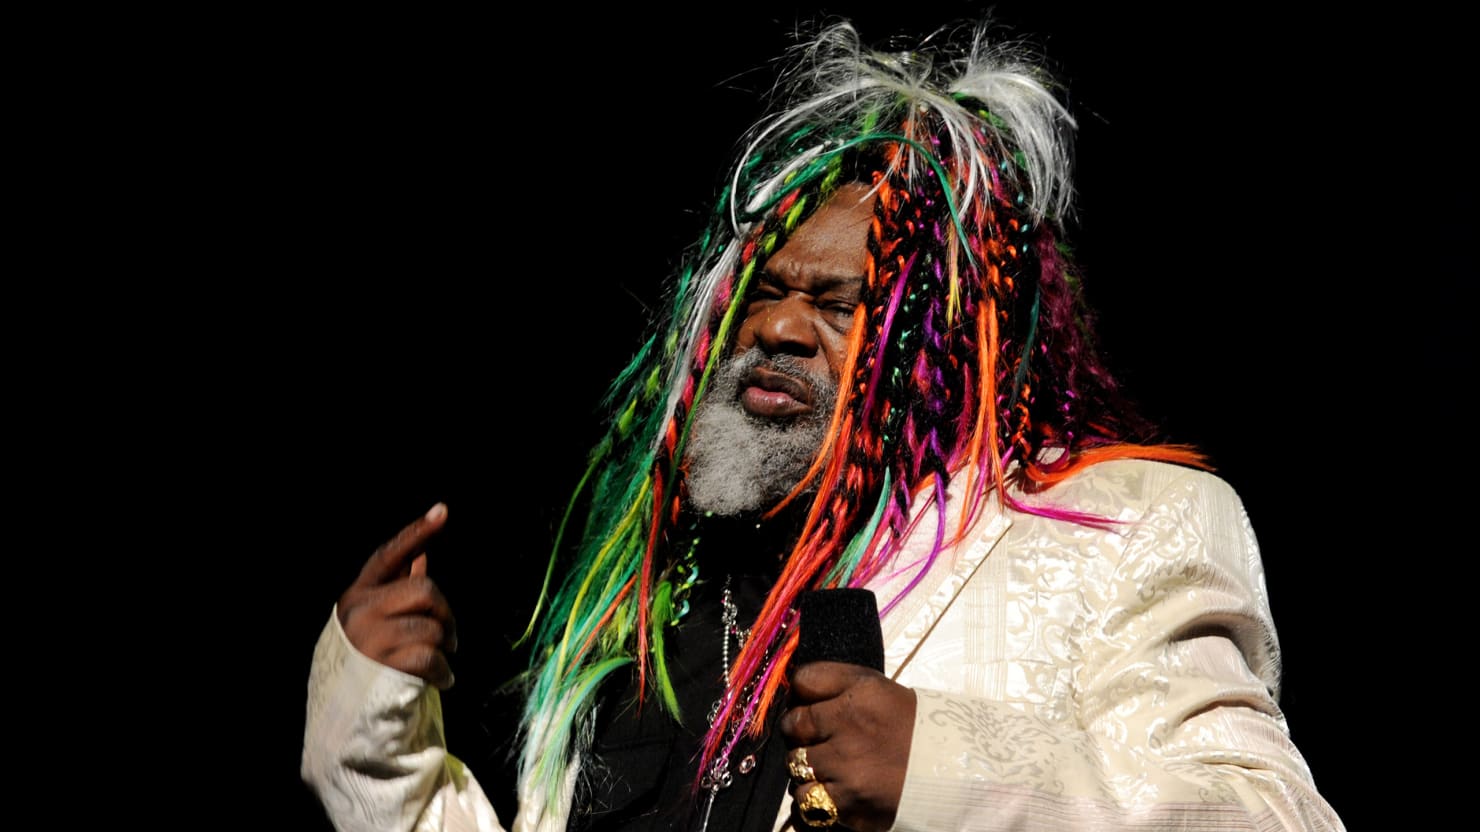 George Clinton on Industry ‘Mobsters’ and How Nobody Wants to Listen to a Crackhead